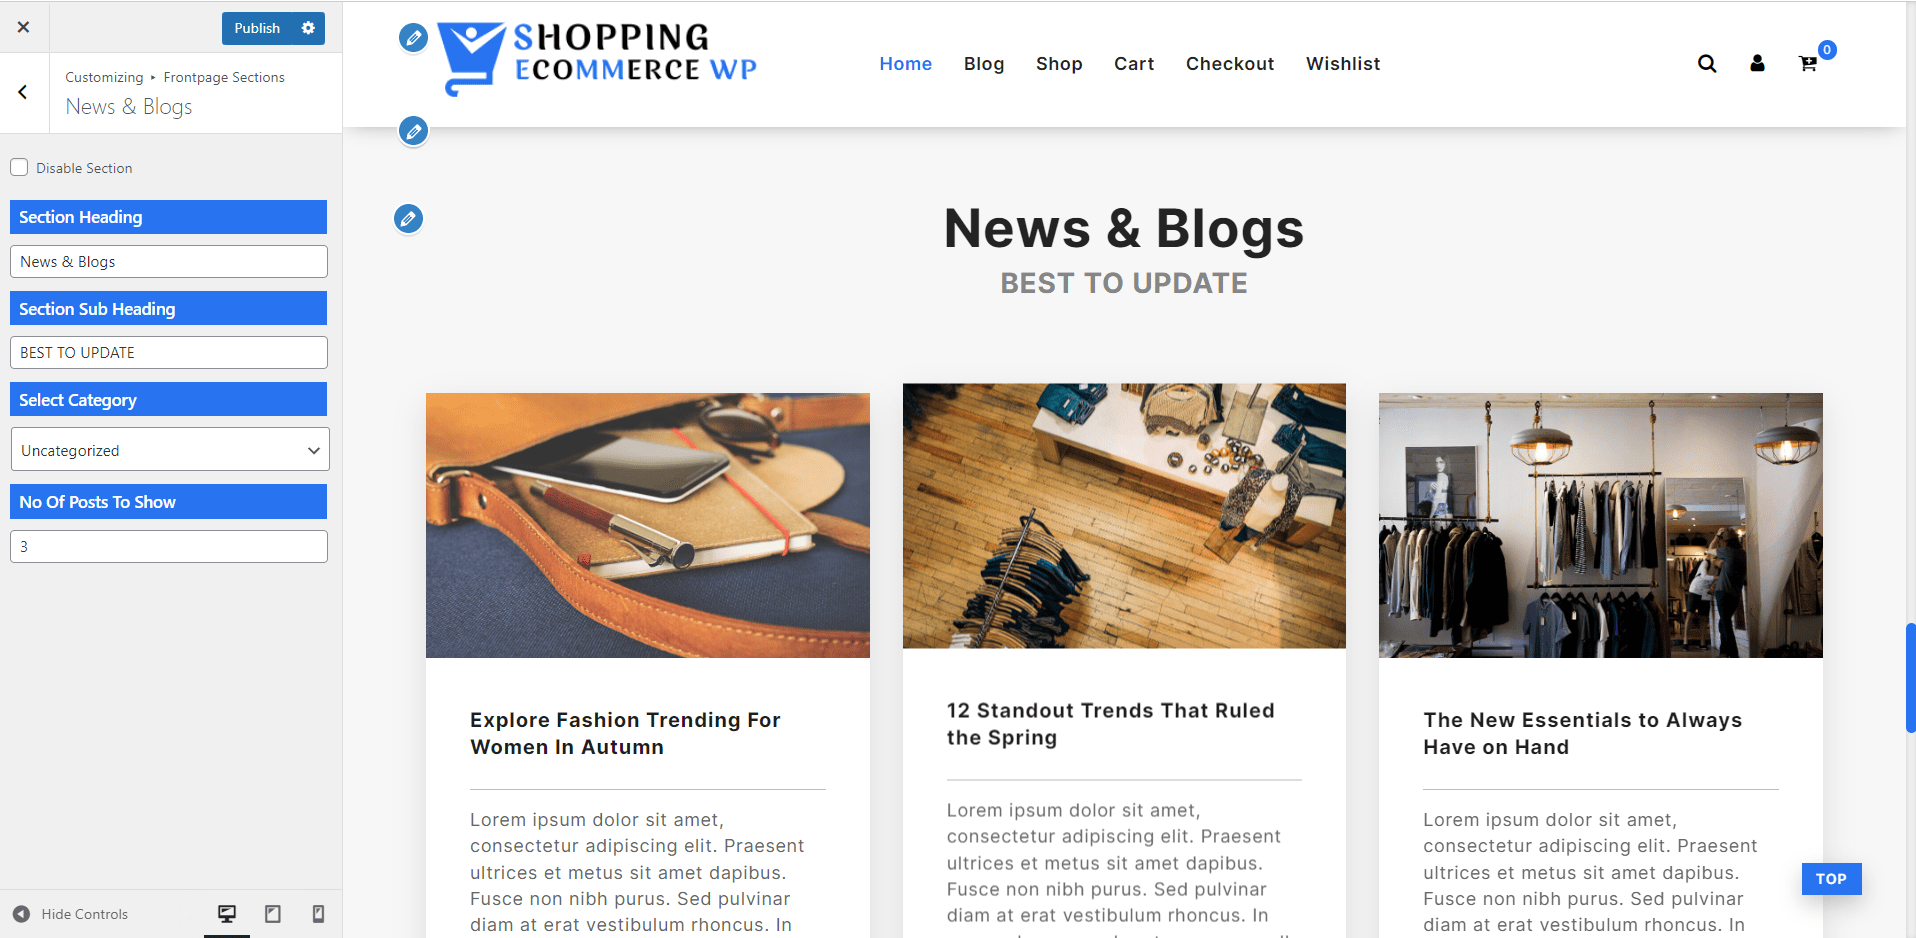 News & Blogs Section